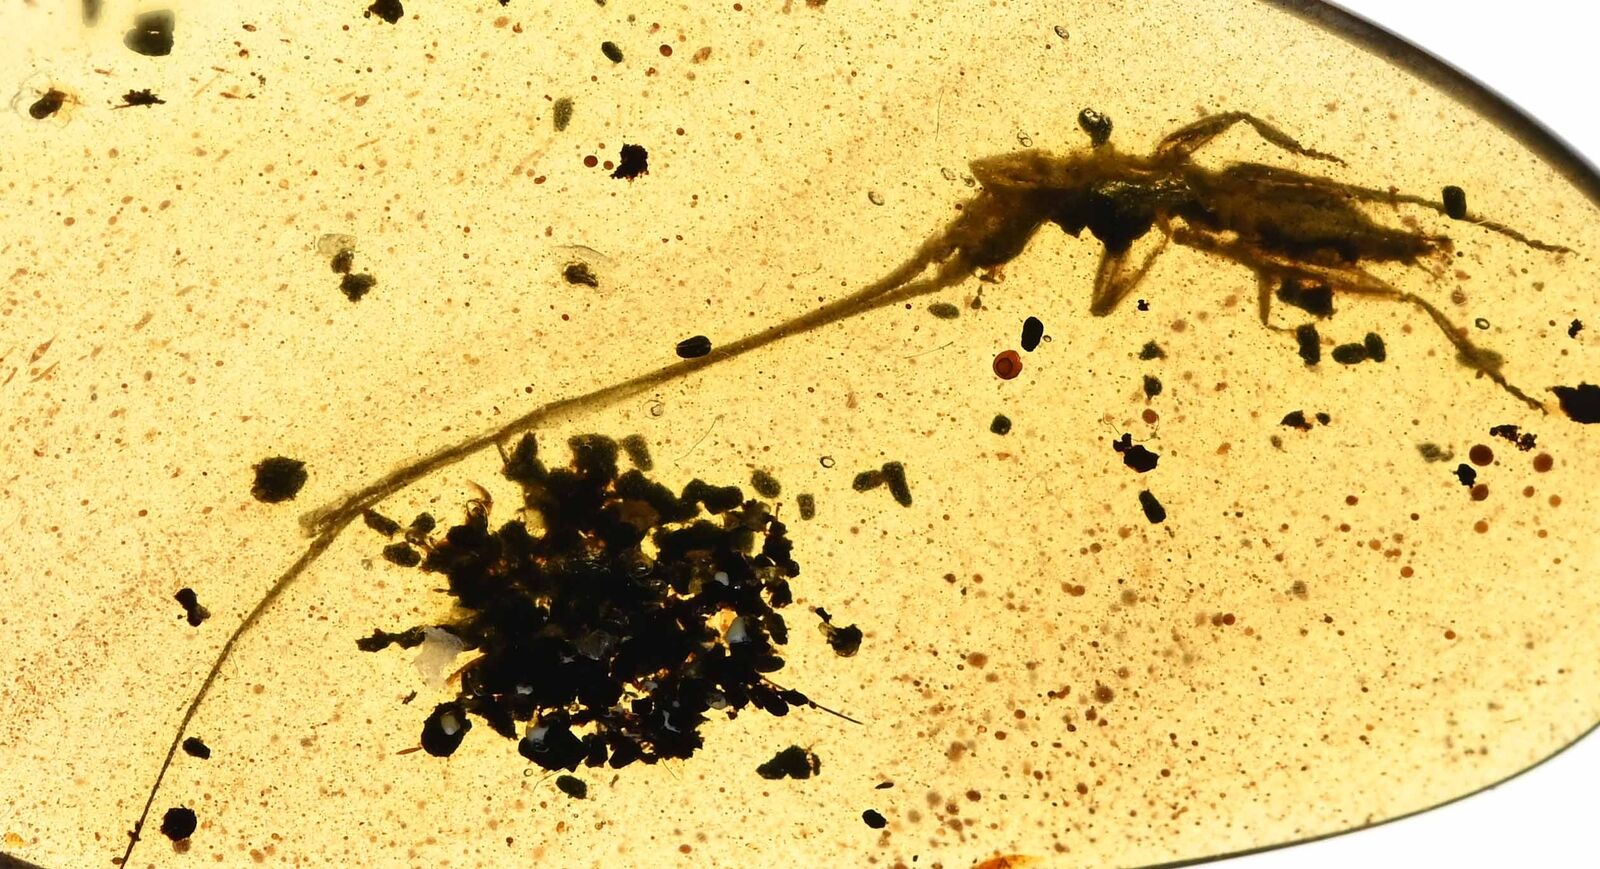 Cricket with super long antennae, Fossil inclusion in Burmese Amber